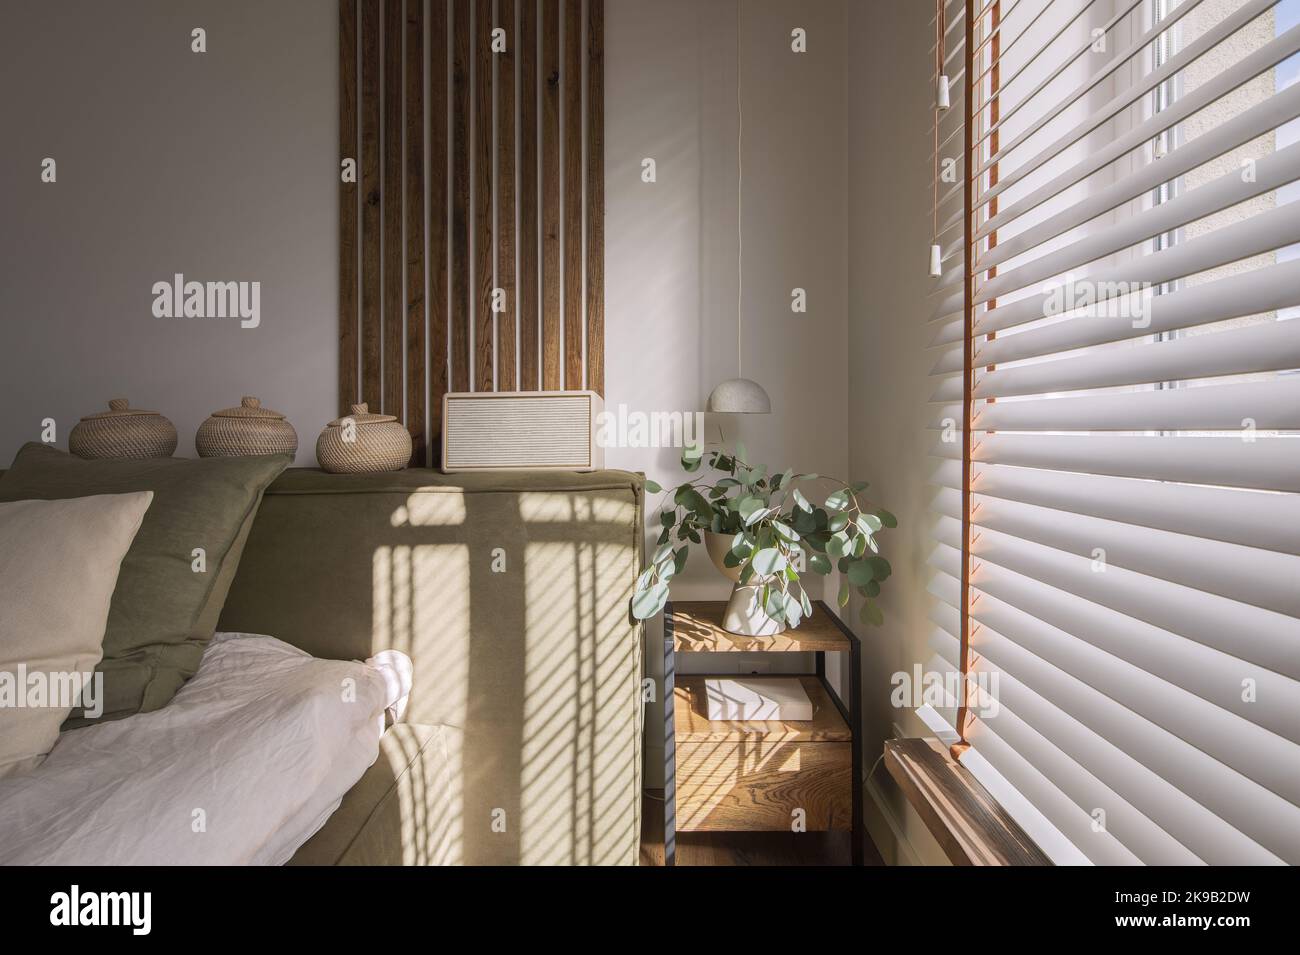 Modern Japandi bedroom interior design in earth tones, natural textures with wooden solid oak furniture. Japandi concept Stock Photo